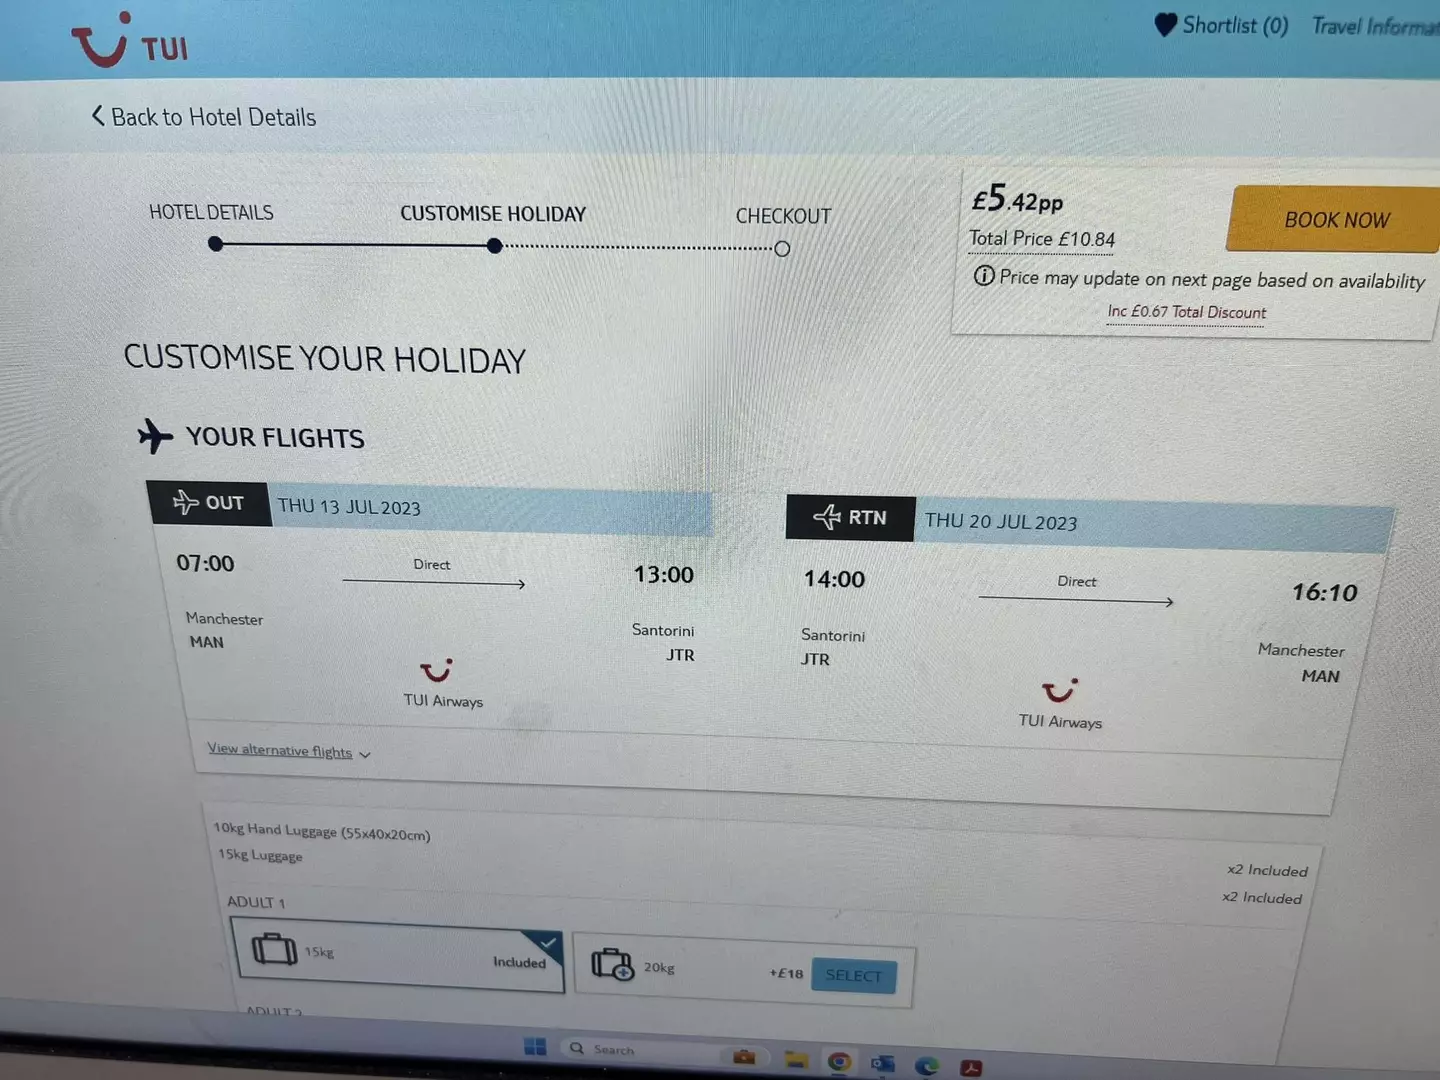 The TUI holiday was advertised on Thursday (12 July) at just £5.42 per person.